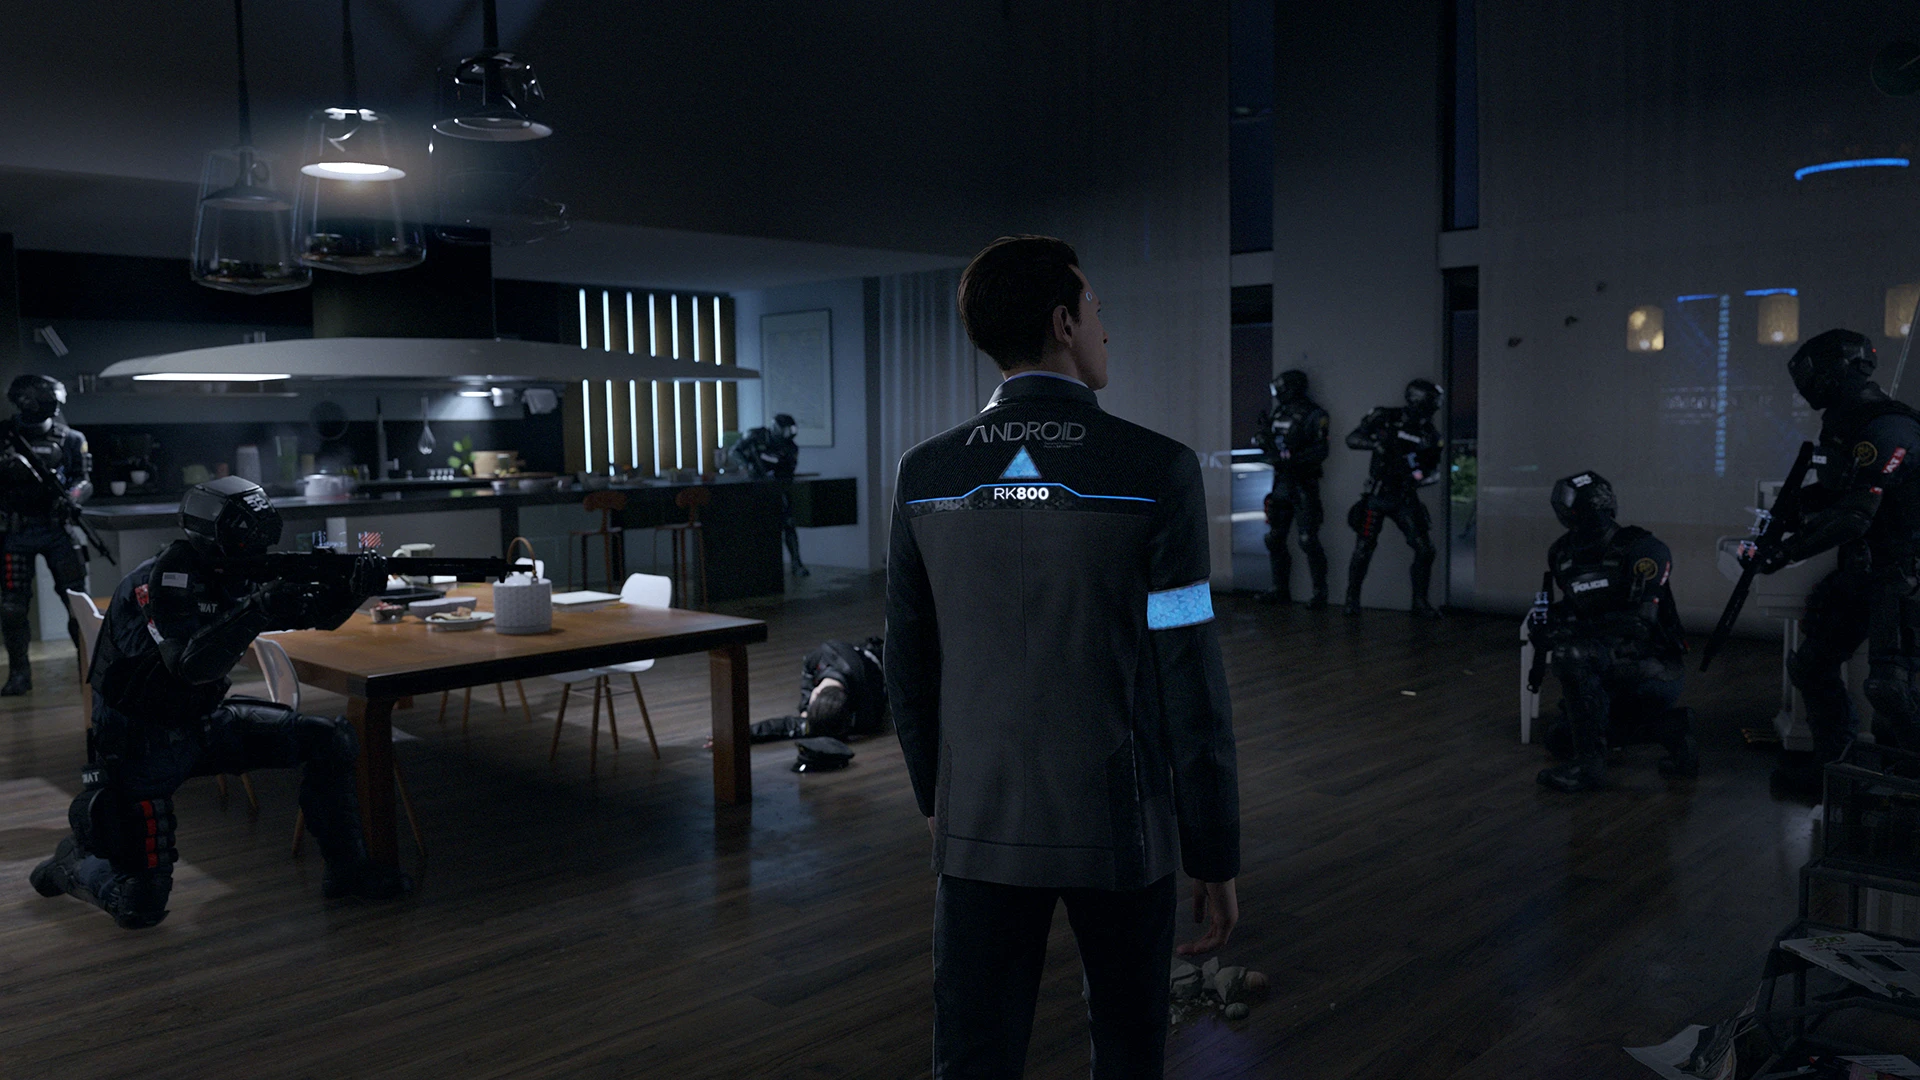 Detroit: Become Human Steam Key for PC - Buy now